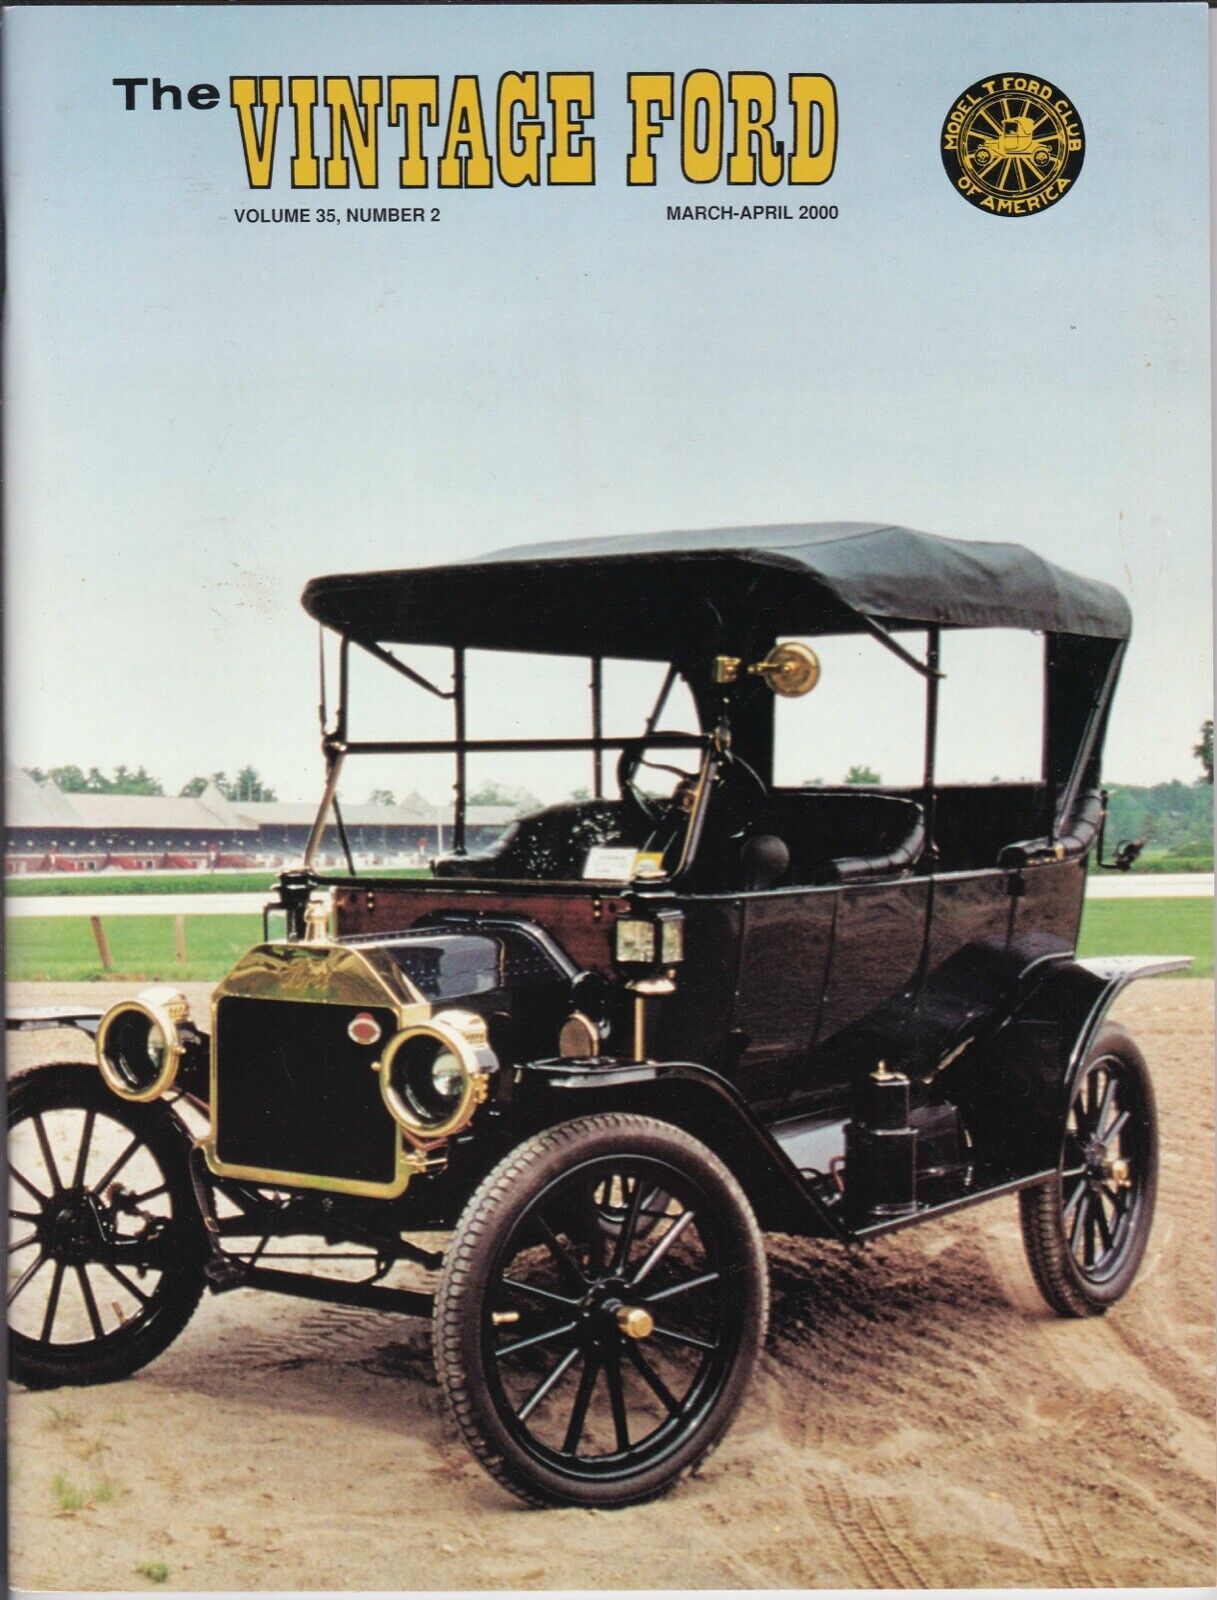 1913 TOURING - THE VINTAGE FORD MAGAZINE - SPRINGS RACE TRACK IN SARATOGA SPRING